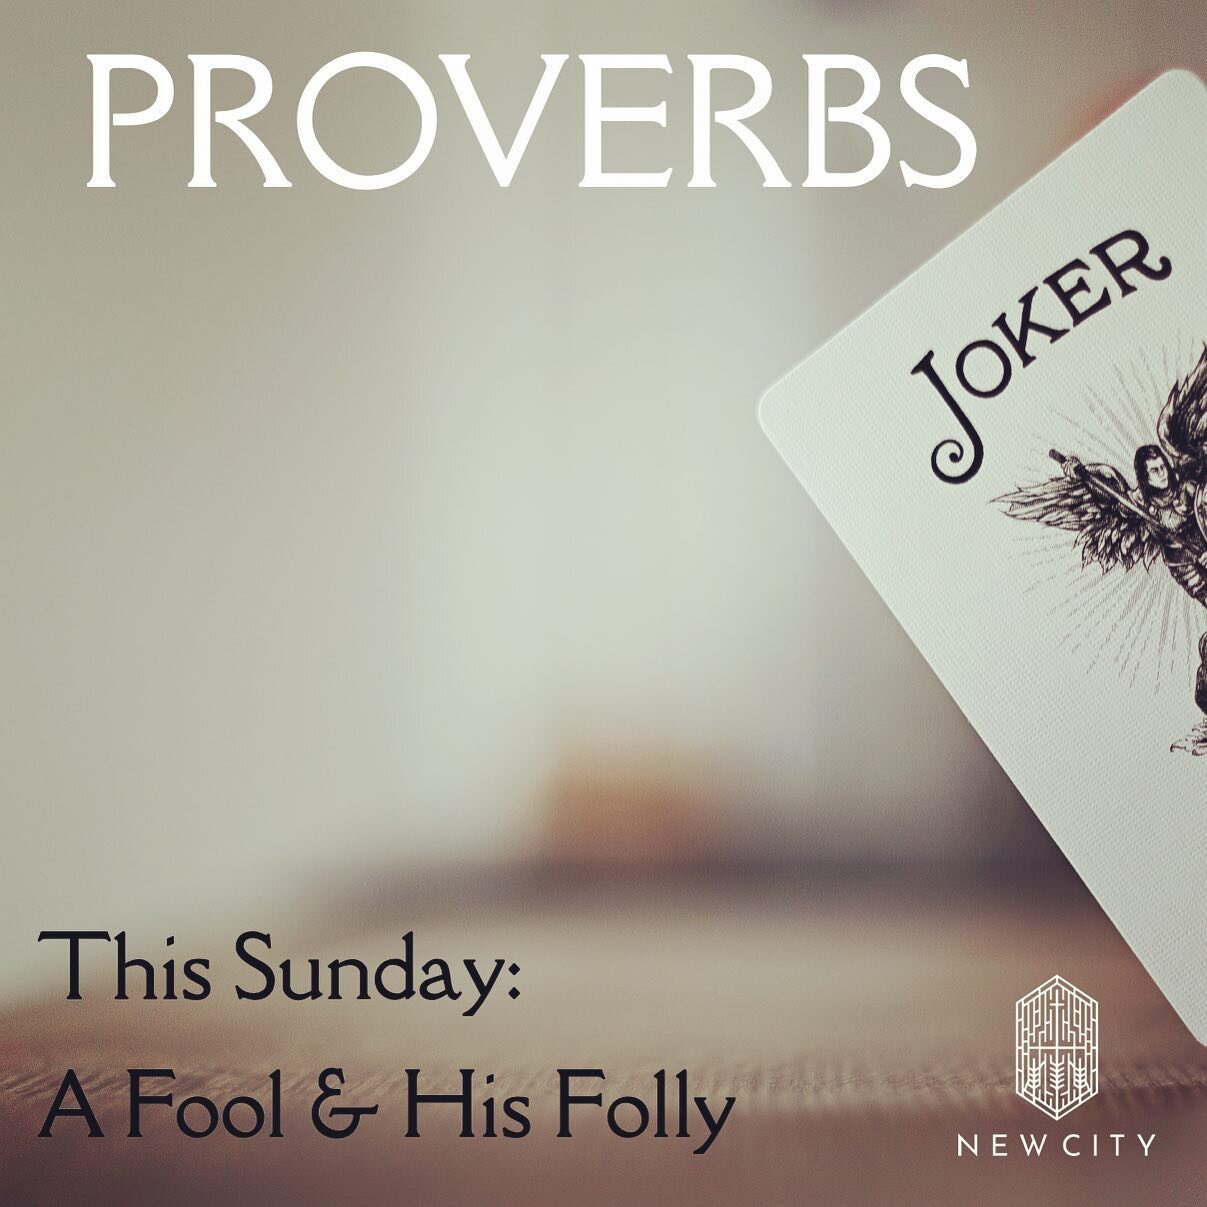 Even though we all play the fool, wisdom shows itself to us in Jesus...even to the most foolish. If you don&rsquo;t have a home church, we&rsquo;d love to host. 10am Sunday&rsquo;s at 229 Pecan St. in Celina. More at www.newcitypres.org